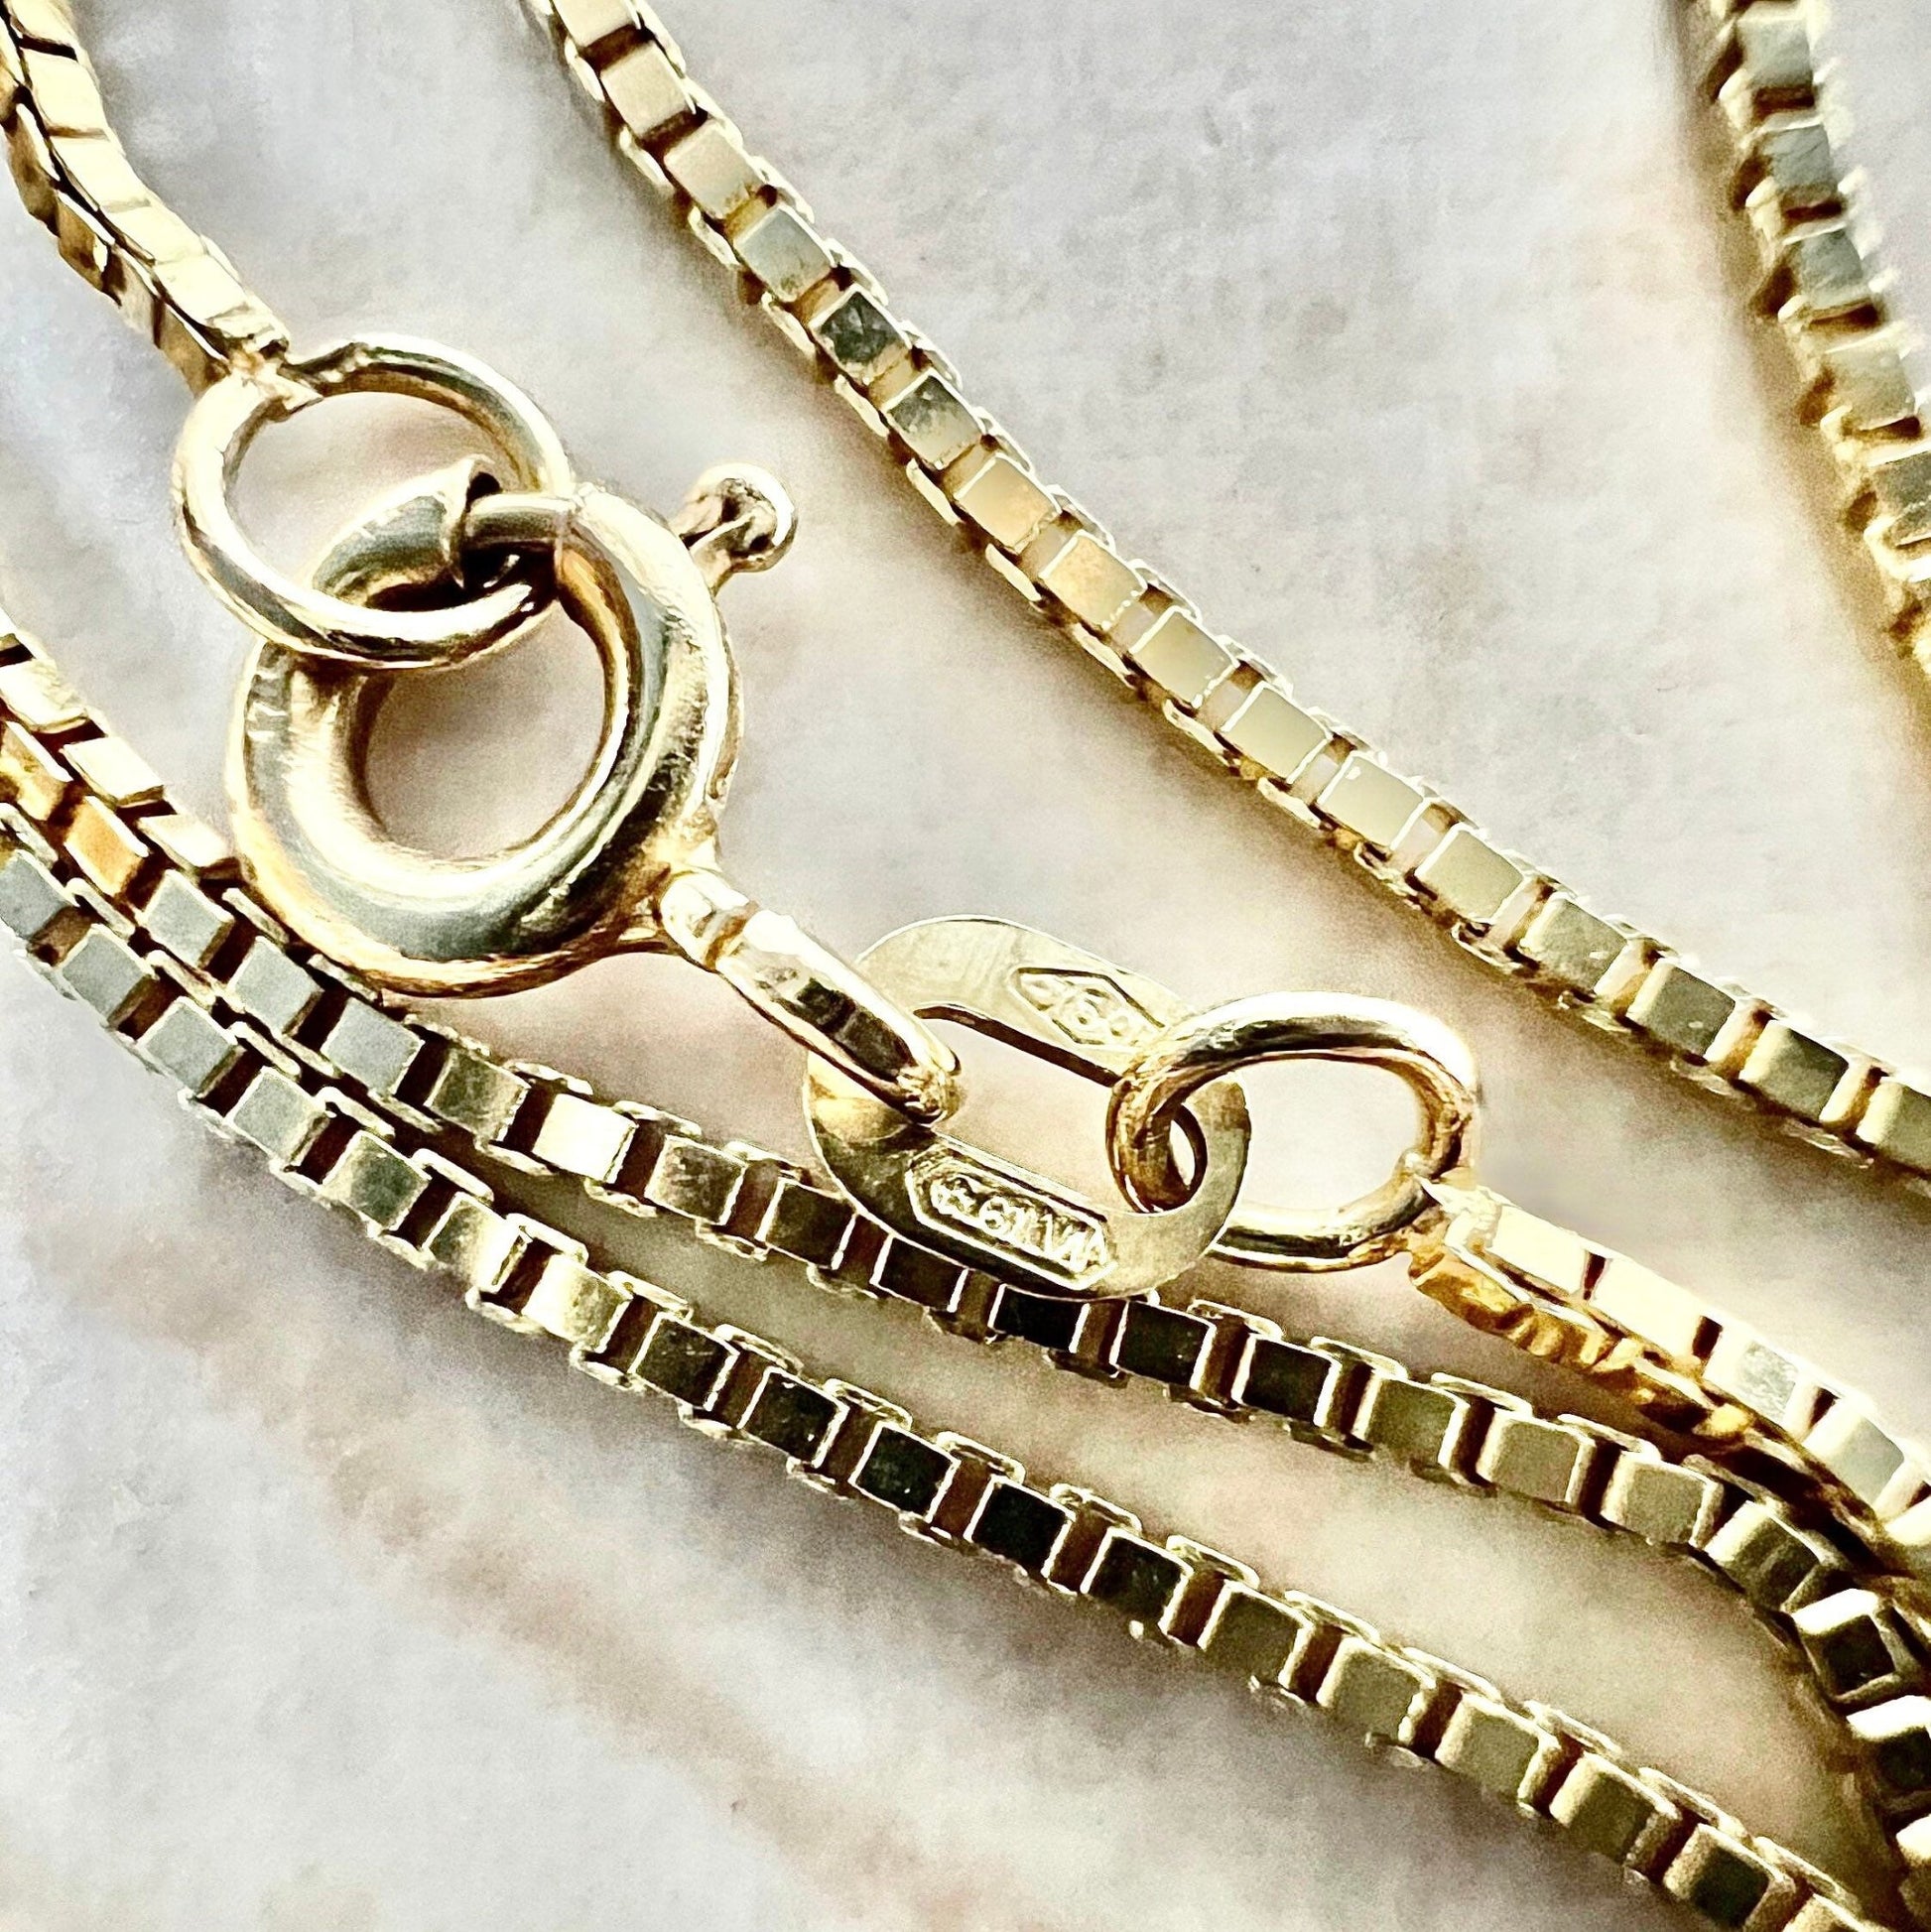 Vintage 18K Yellow Gold Box Chain - 17.75” Gold Chain - Yellow Gold Necklace - Italian Gold Chain Necklace - Best Gifts For Her - 18K Gold